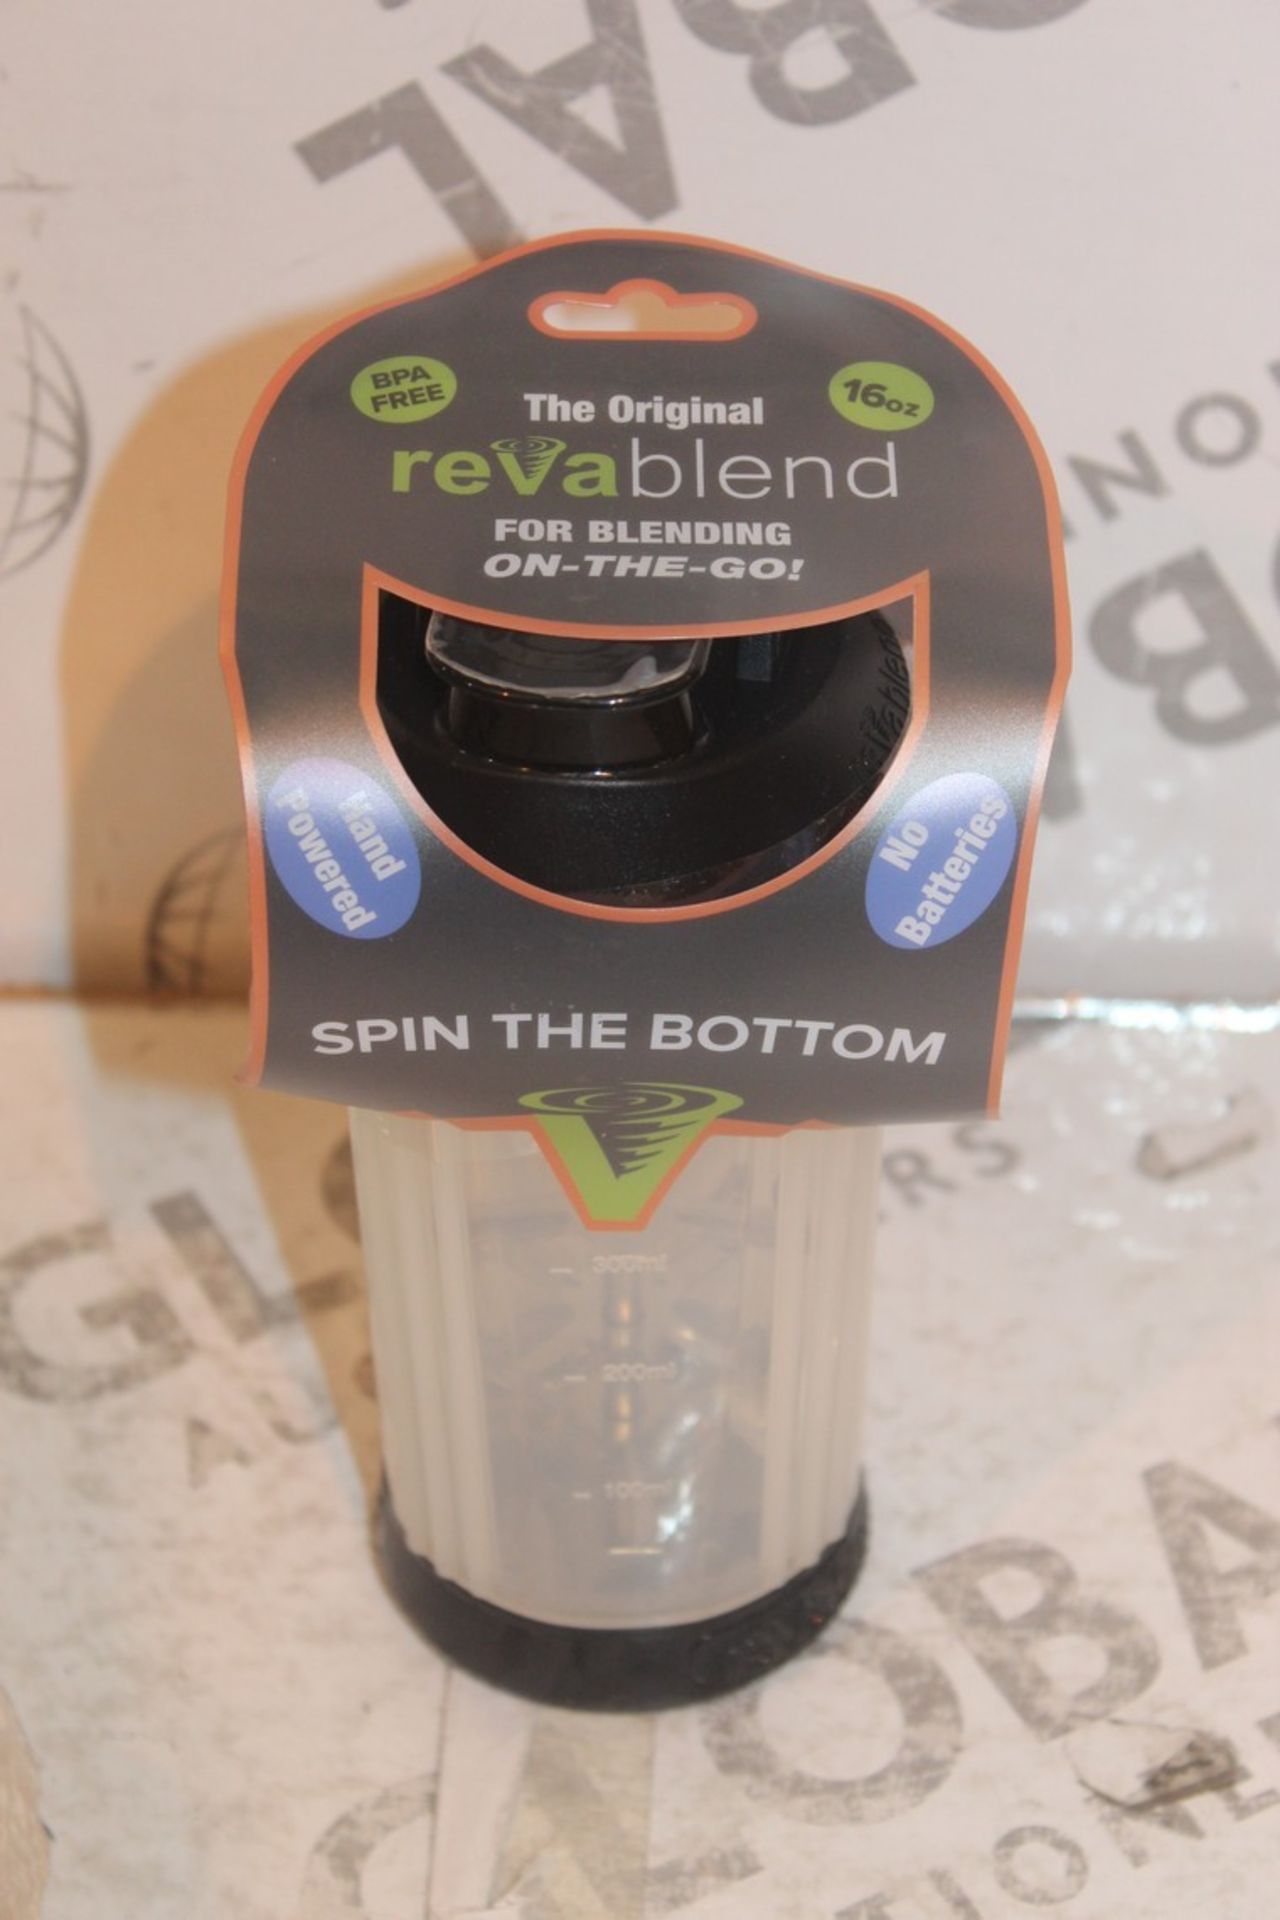 Lot to Contain 5 Brand New Spin the Bottom Reeve Blend Original Drinks Blending Cups Combined RRP £